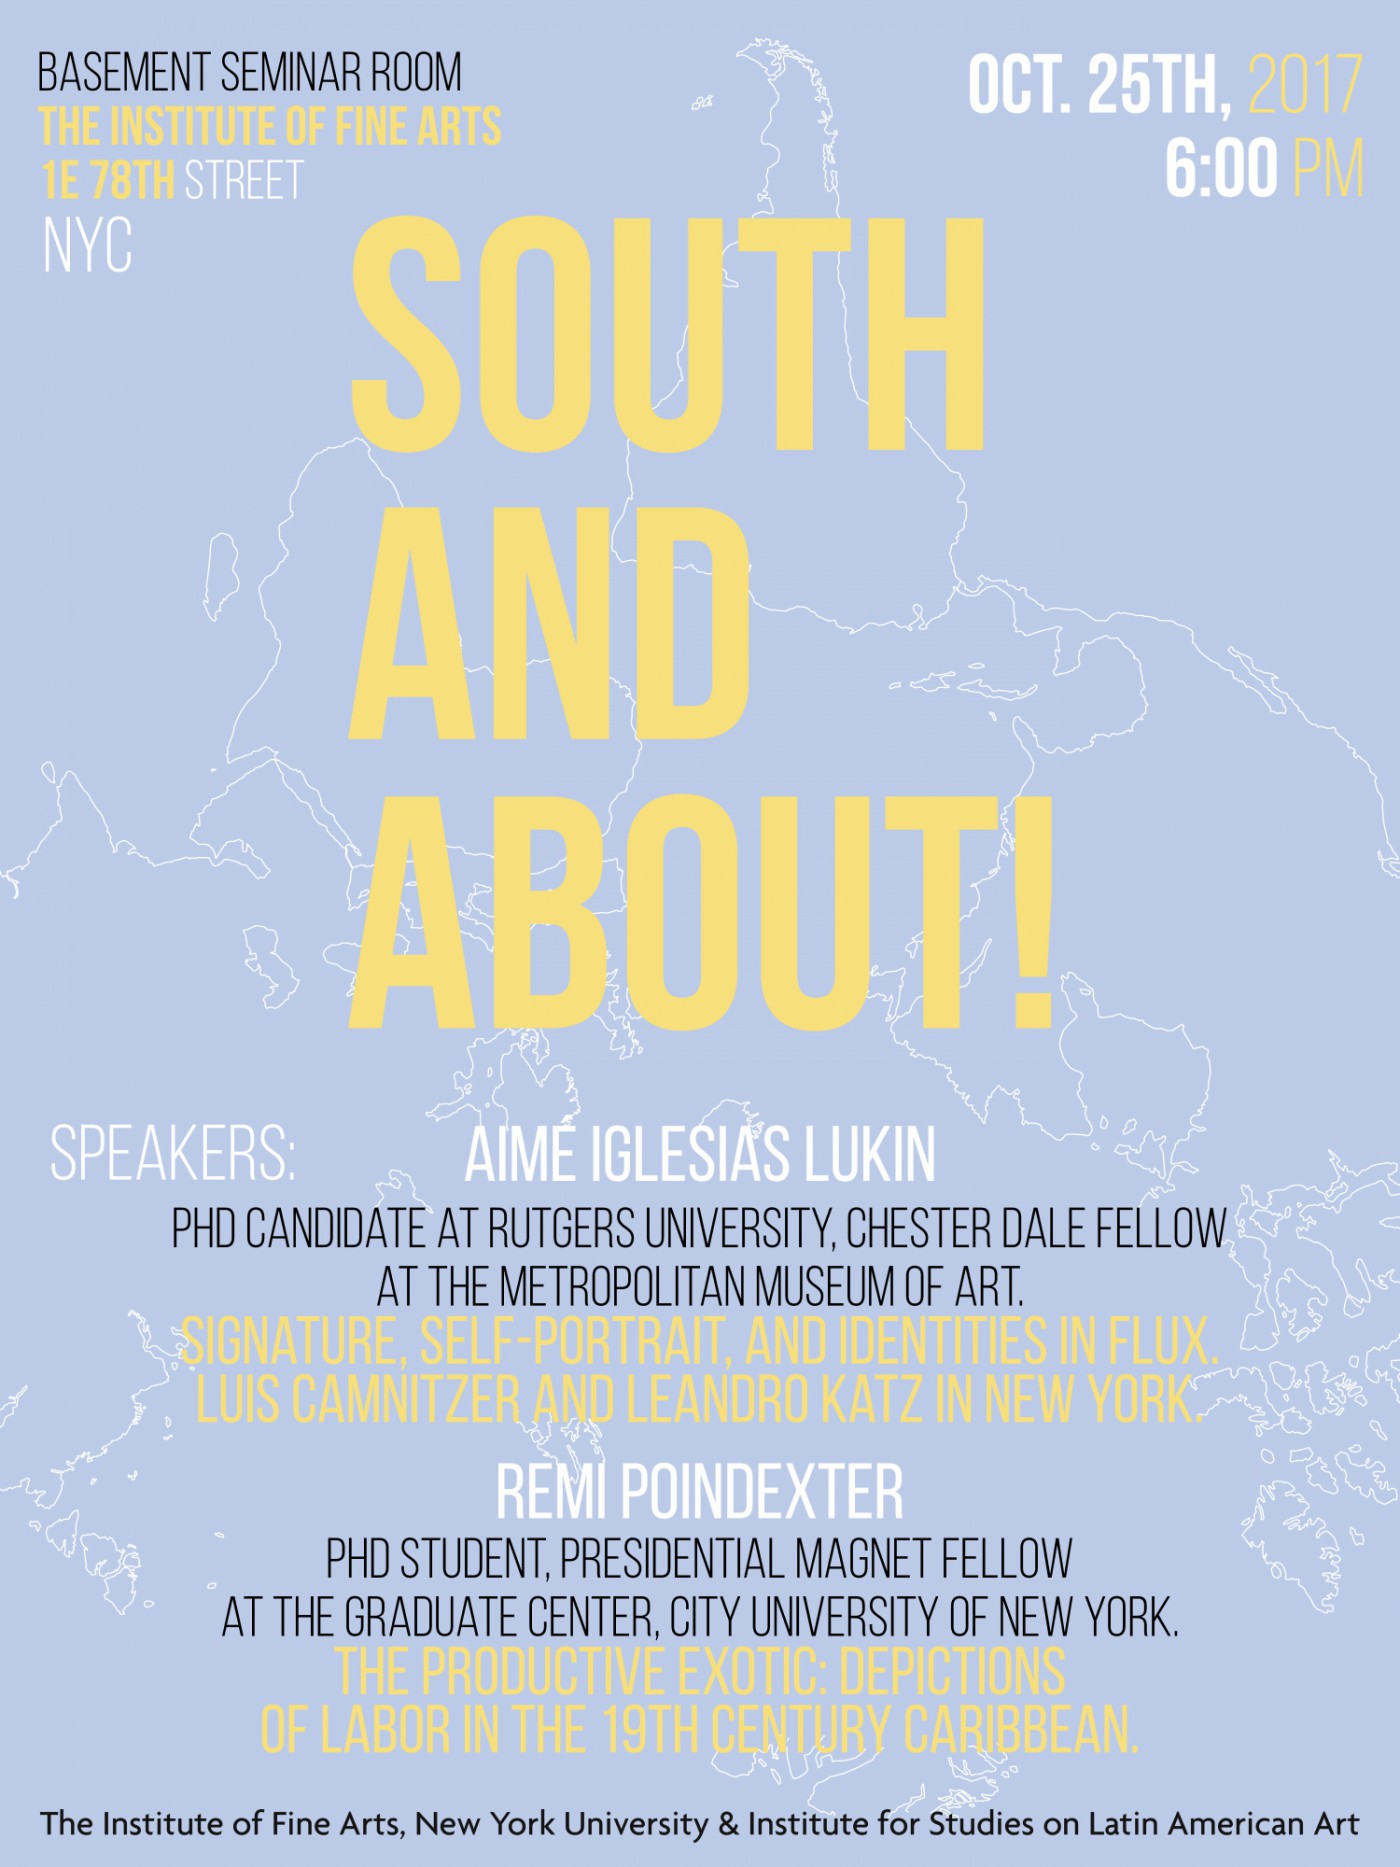 Event poster with bold text over a background of an upside down world map.